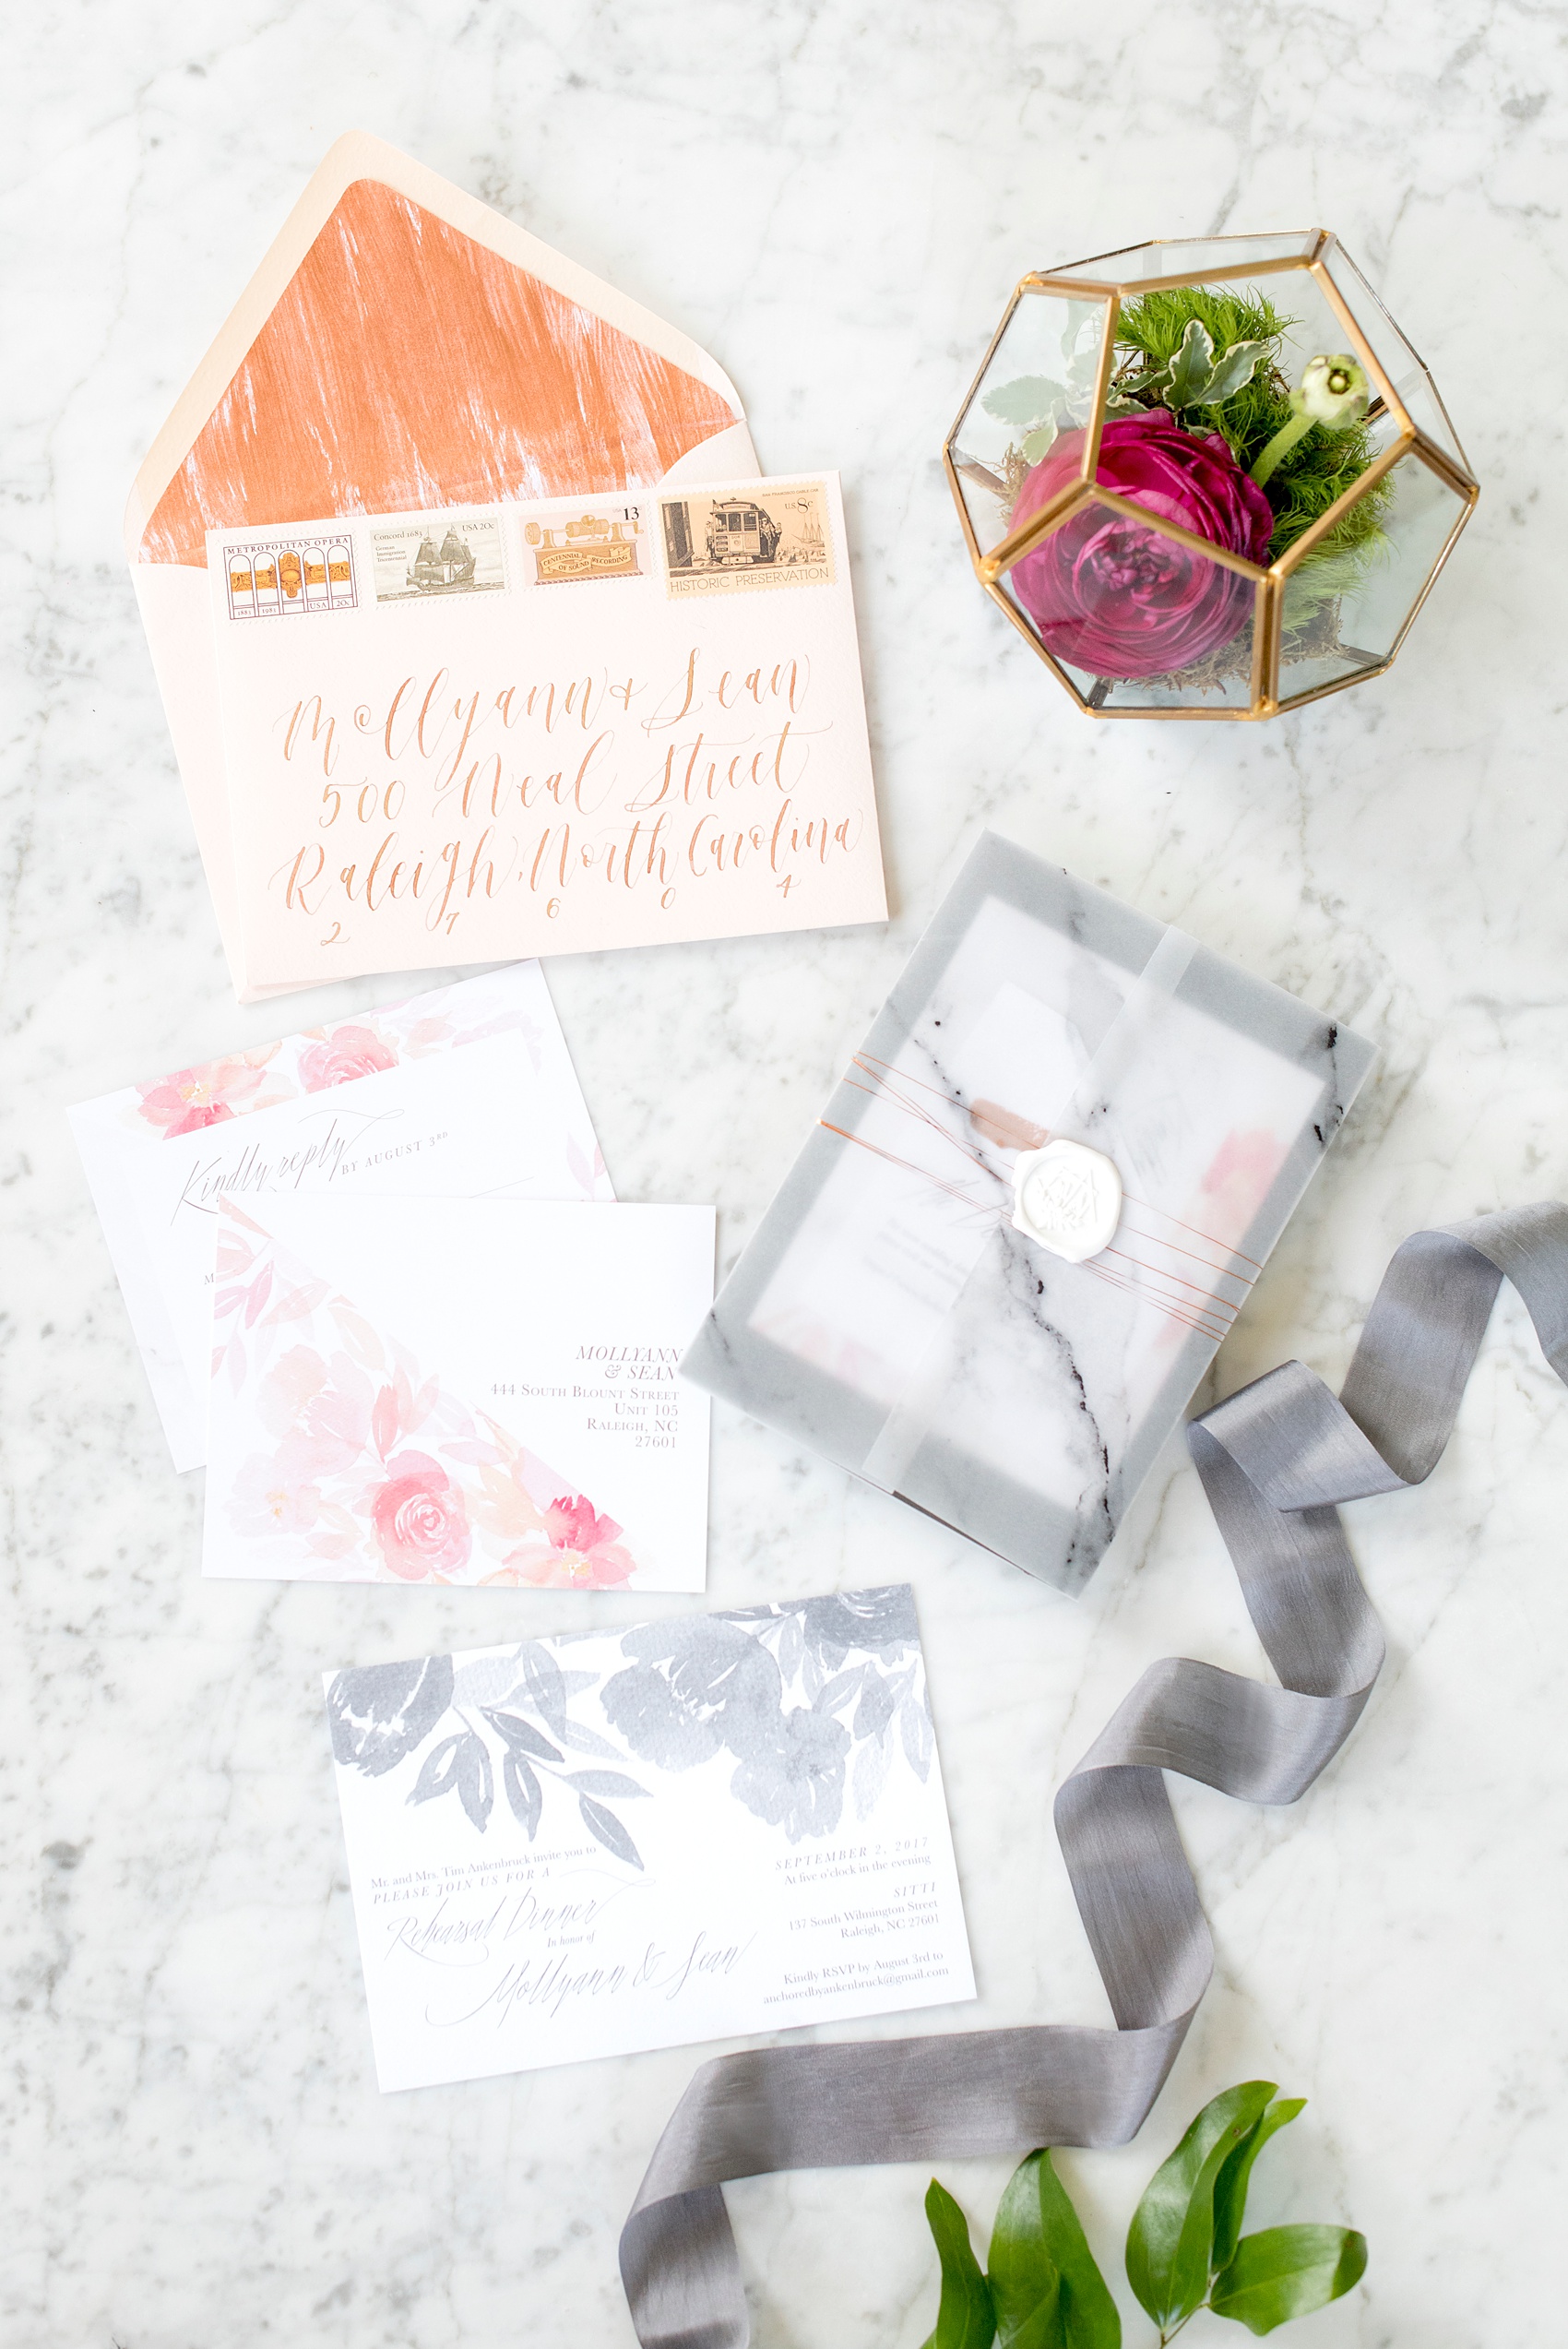 Mikkel Paige Photography pictures from a Merrimon-Wynne House wedding in Raleigh, NC. Photo of their invitation suite. Stationery designed by One and Only Paper. Calligraphy by Quietude Co. Palette of pink, grey, white and marble and floral patterns.